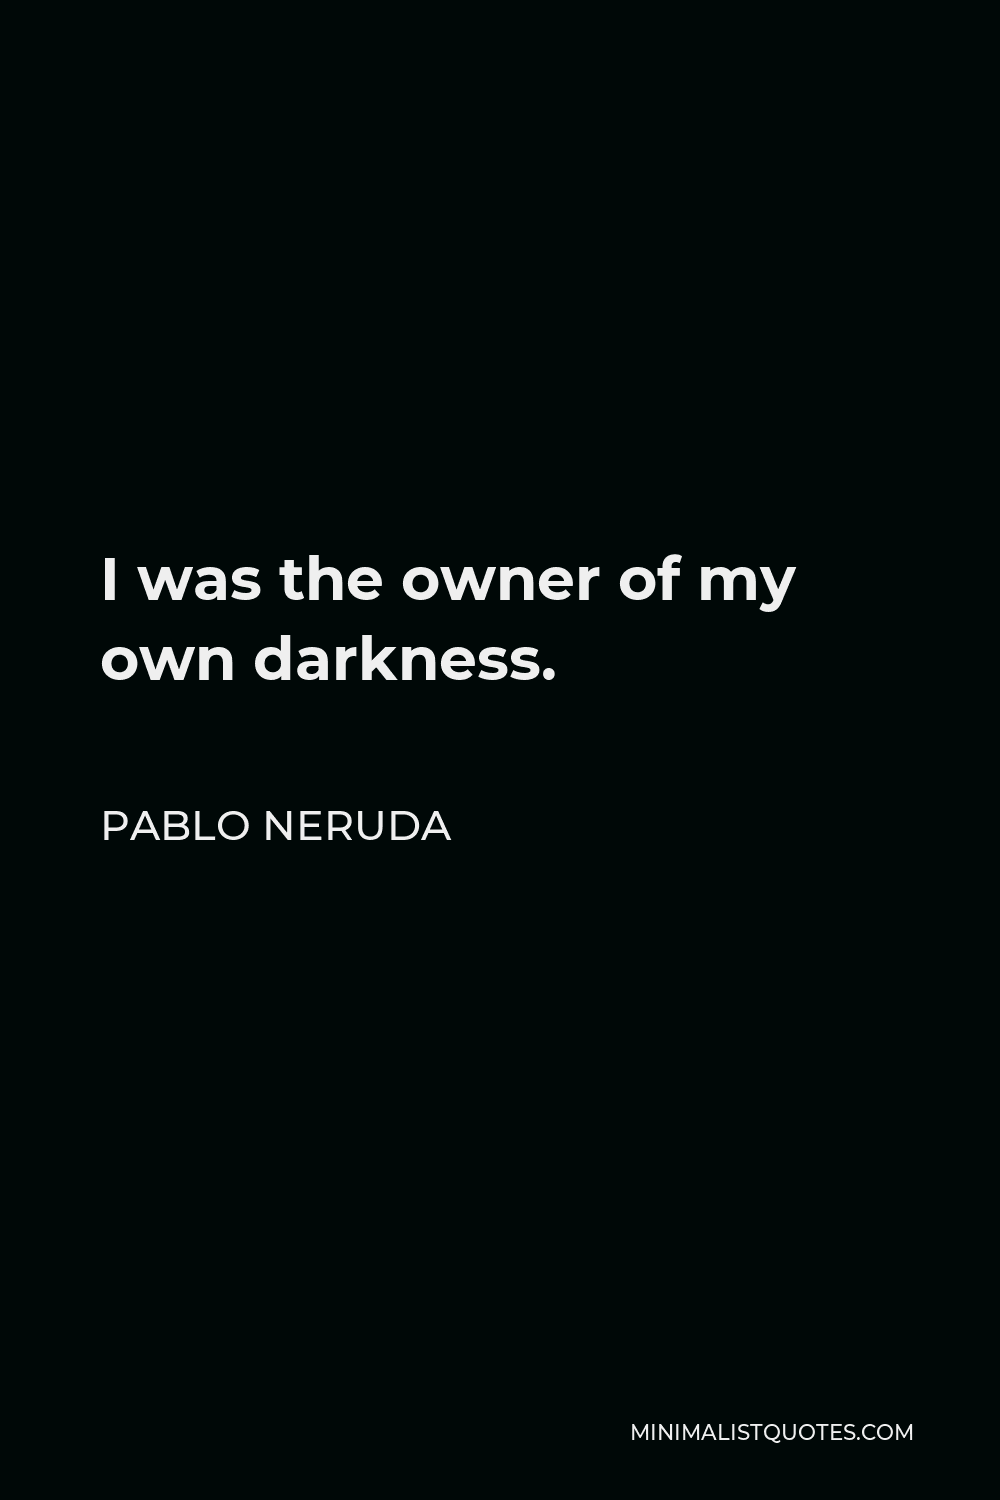 Pablo Neruda Quote - I was the owner of my own darkness.